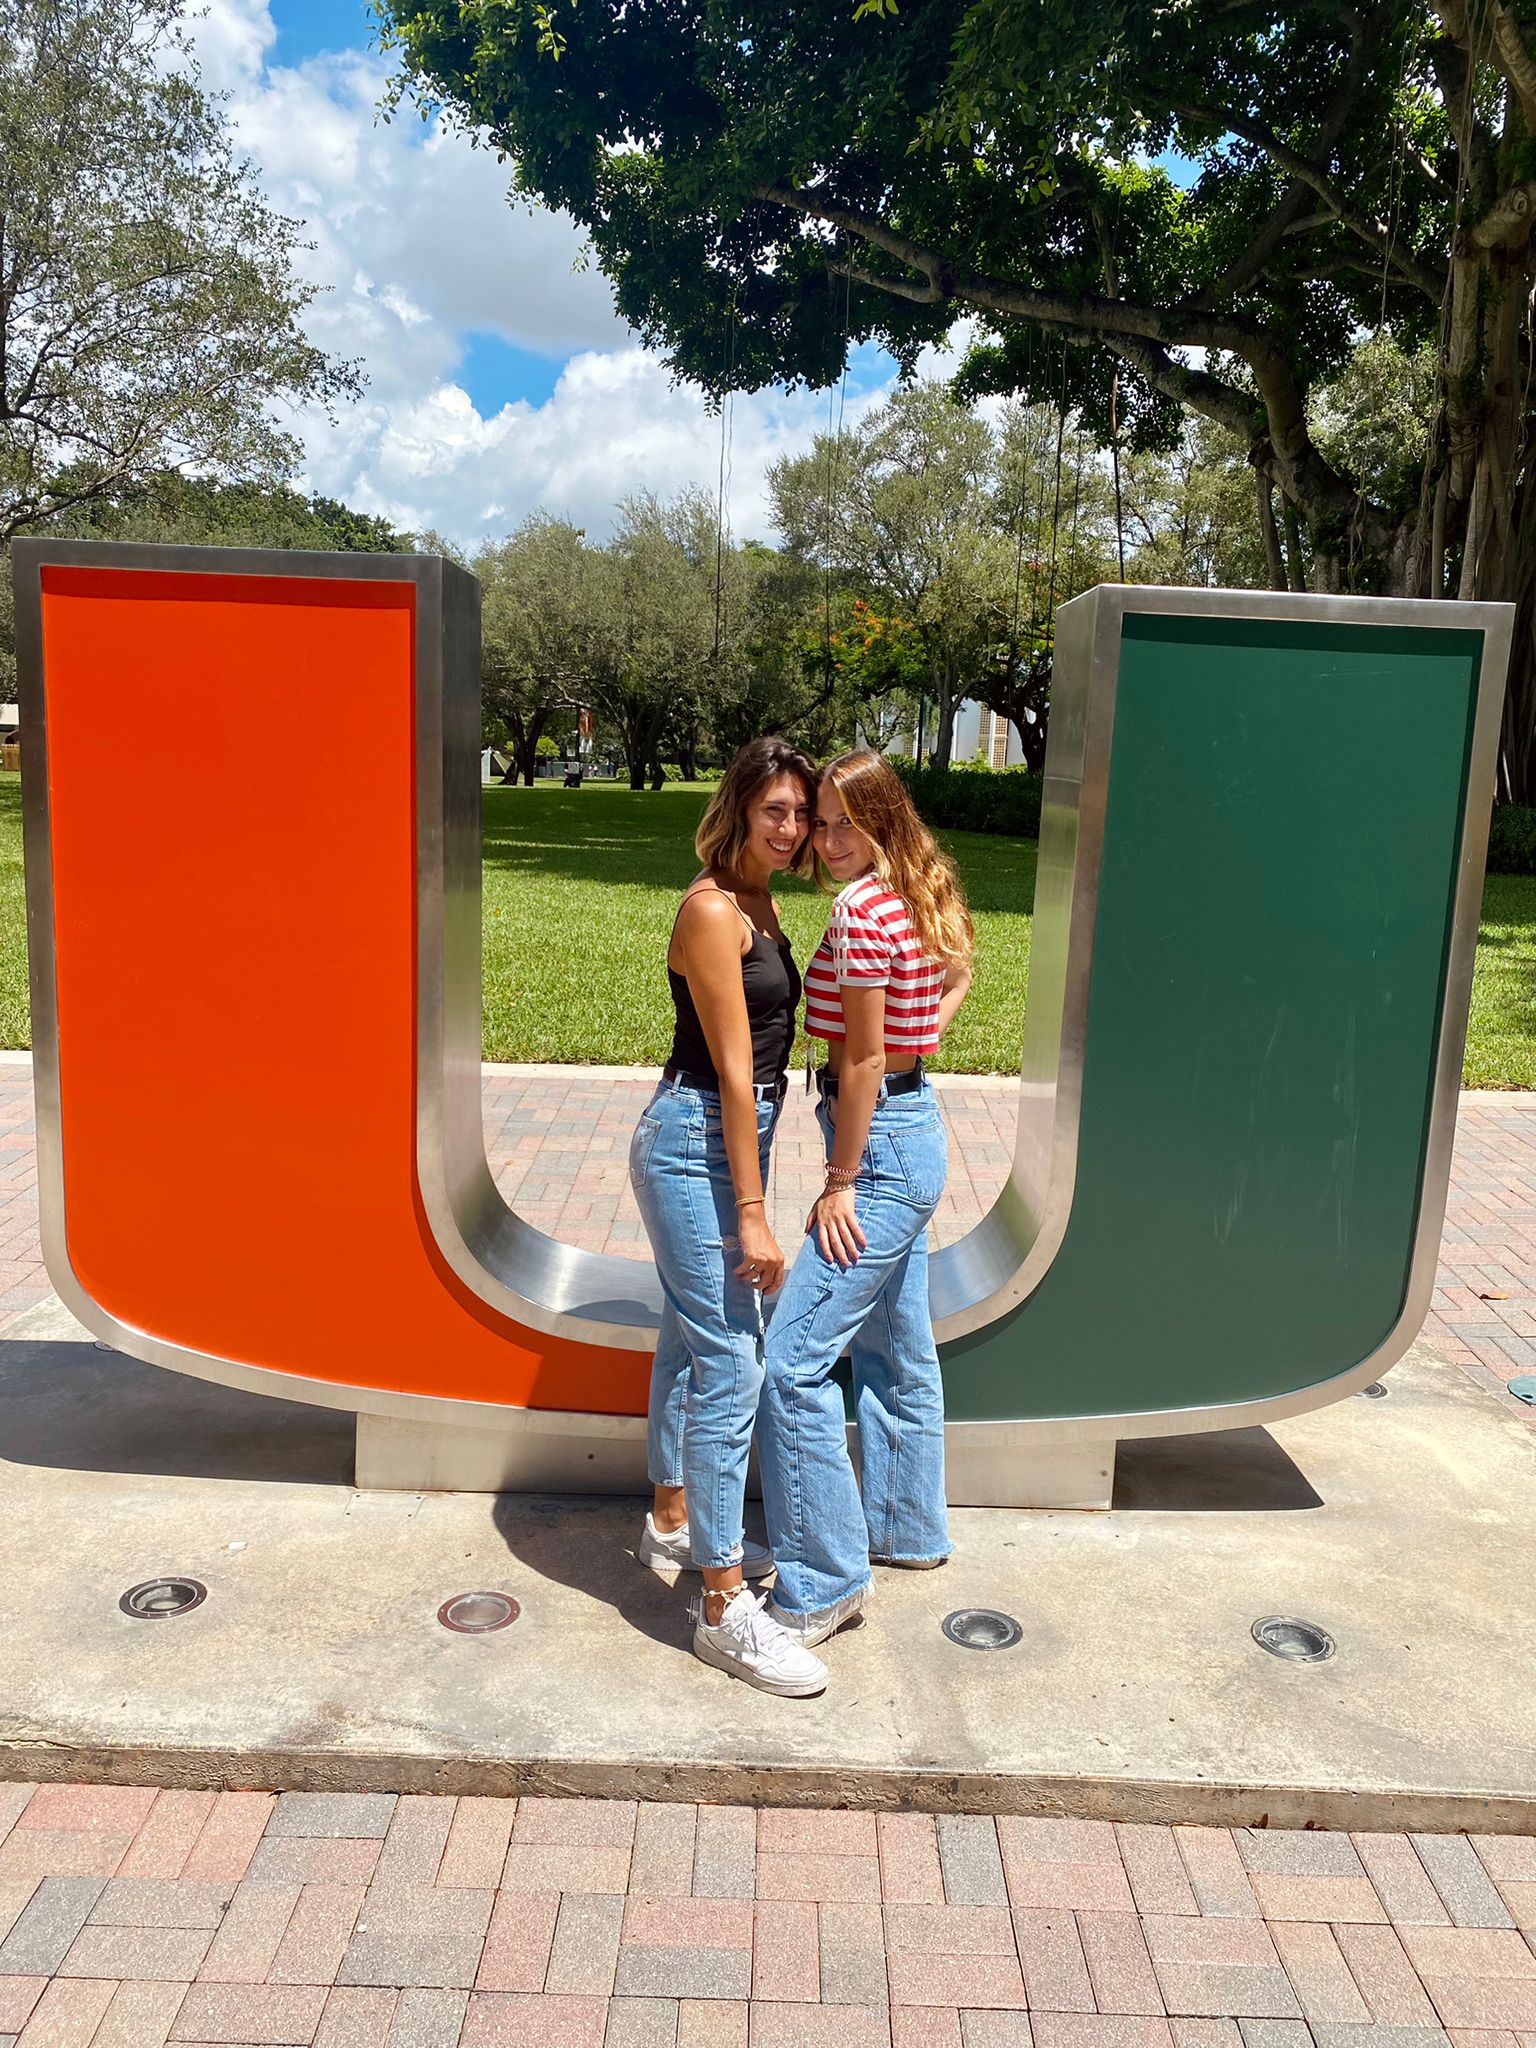 JCU students at the University of Miami